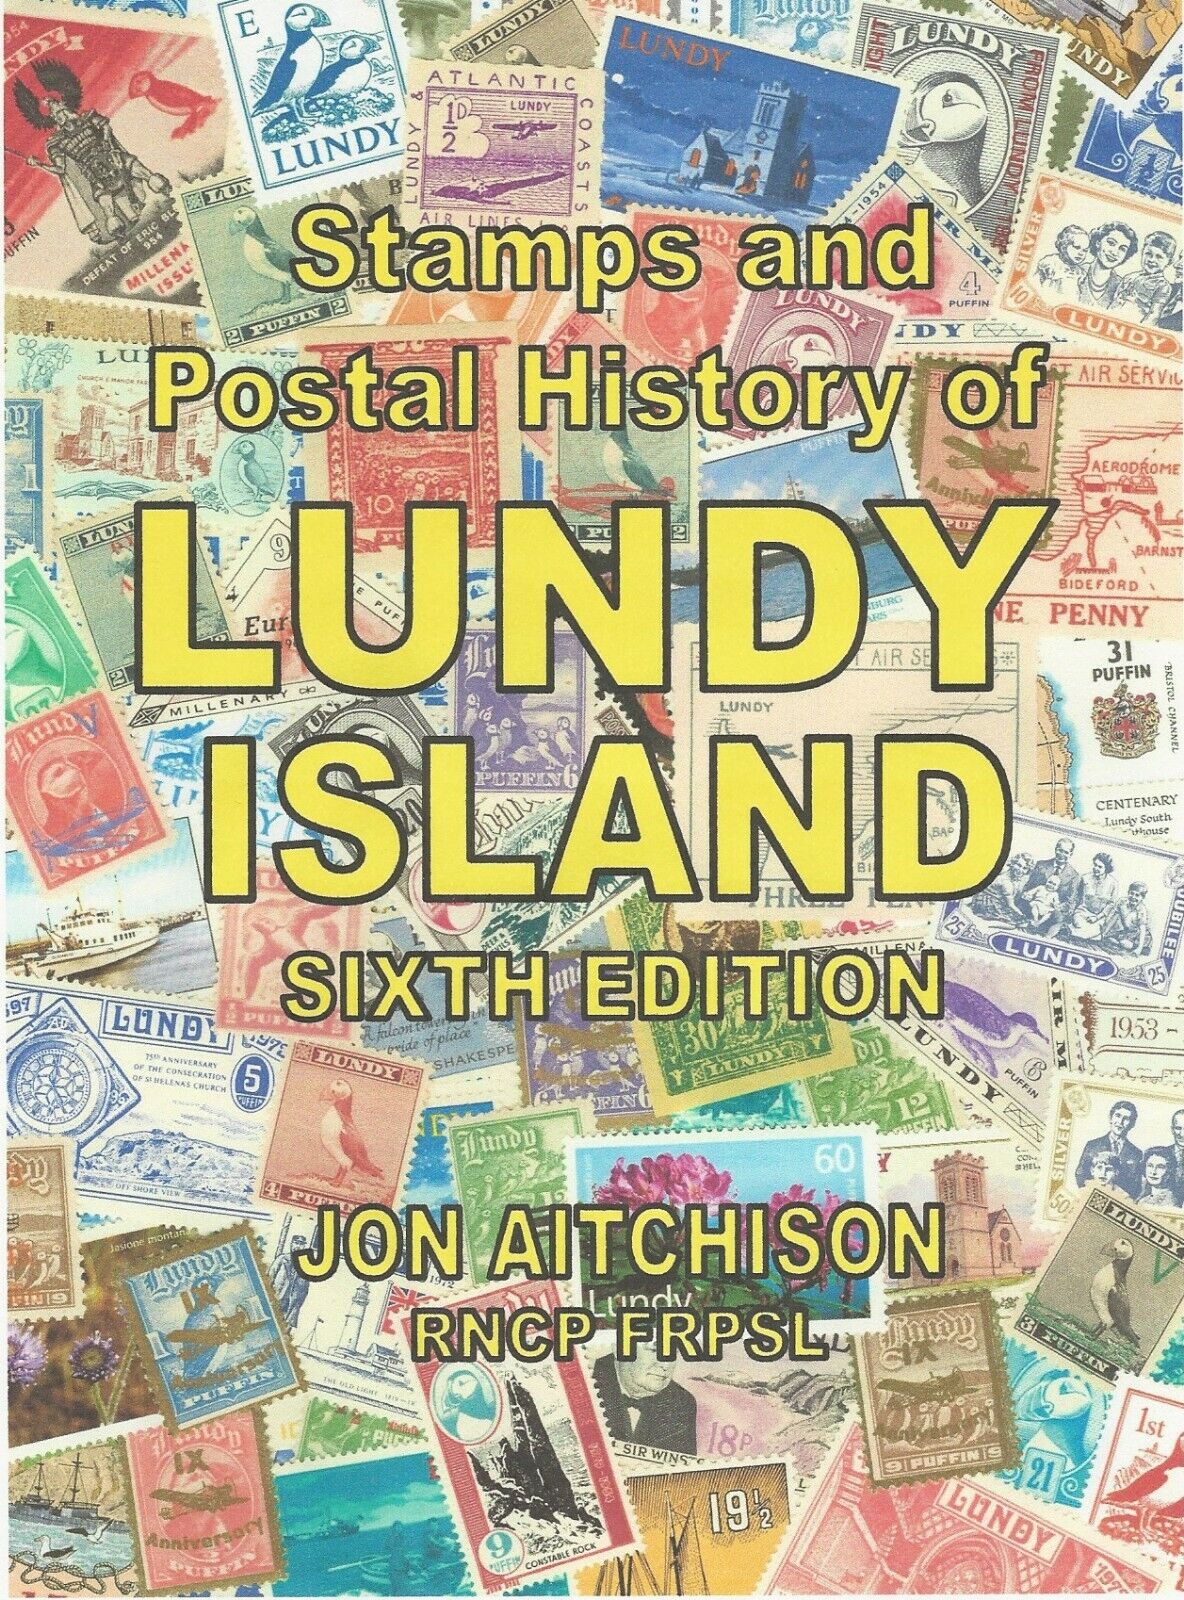 Lundy Island, Stamps and Postal History of. Sixth edition.